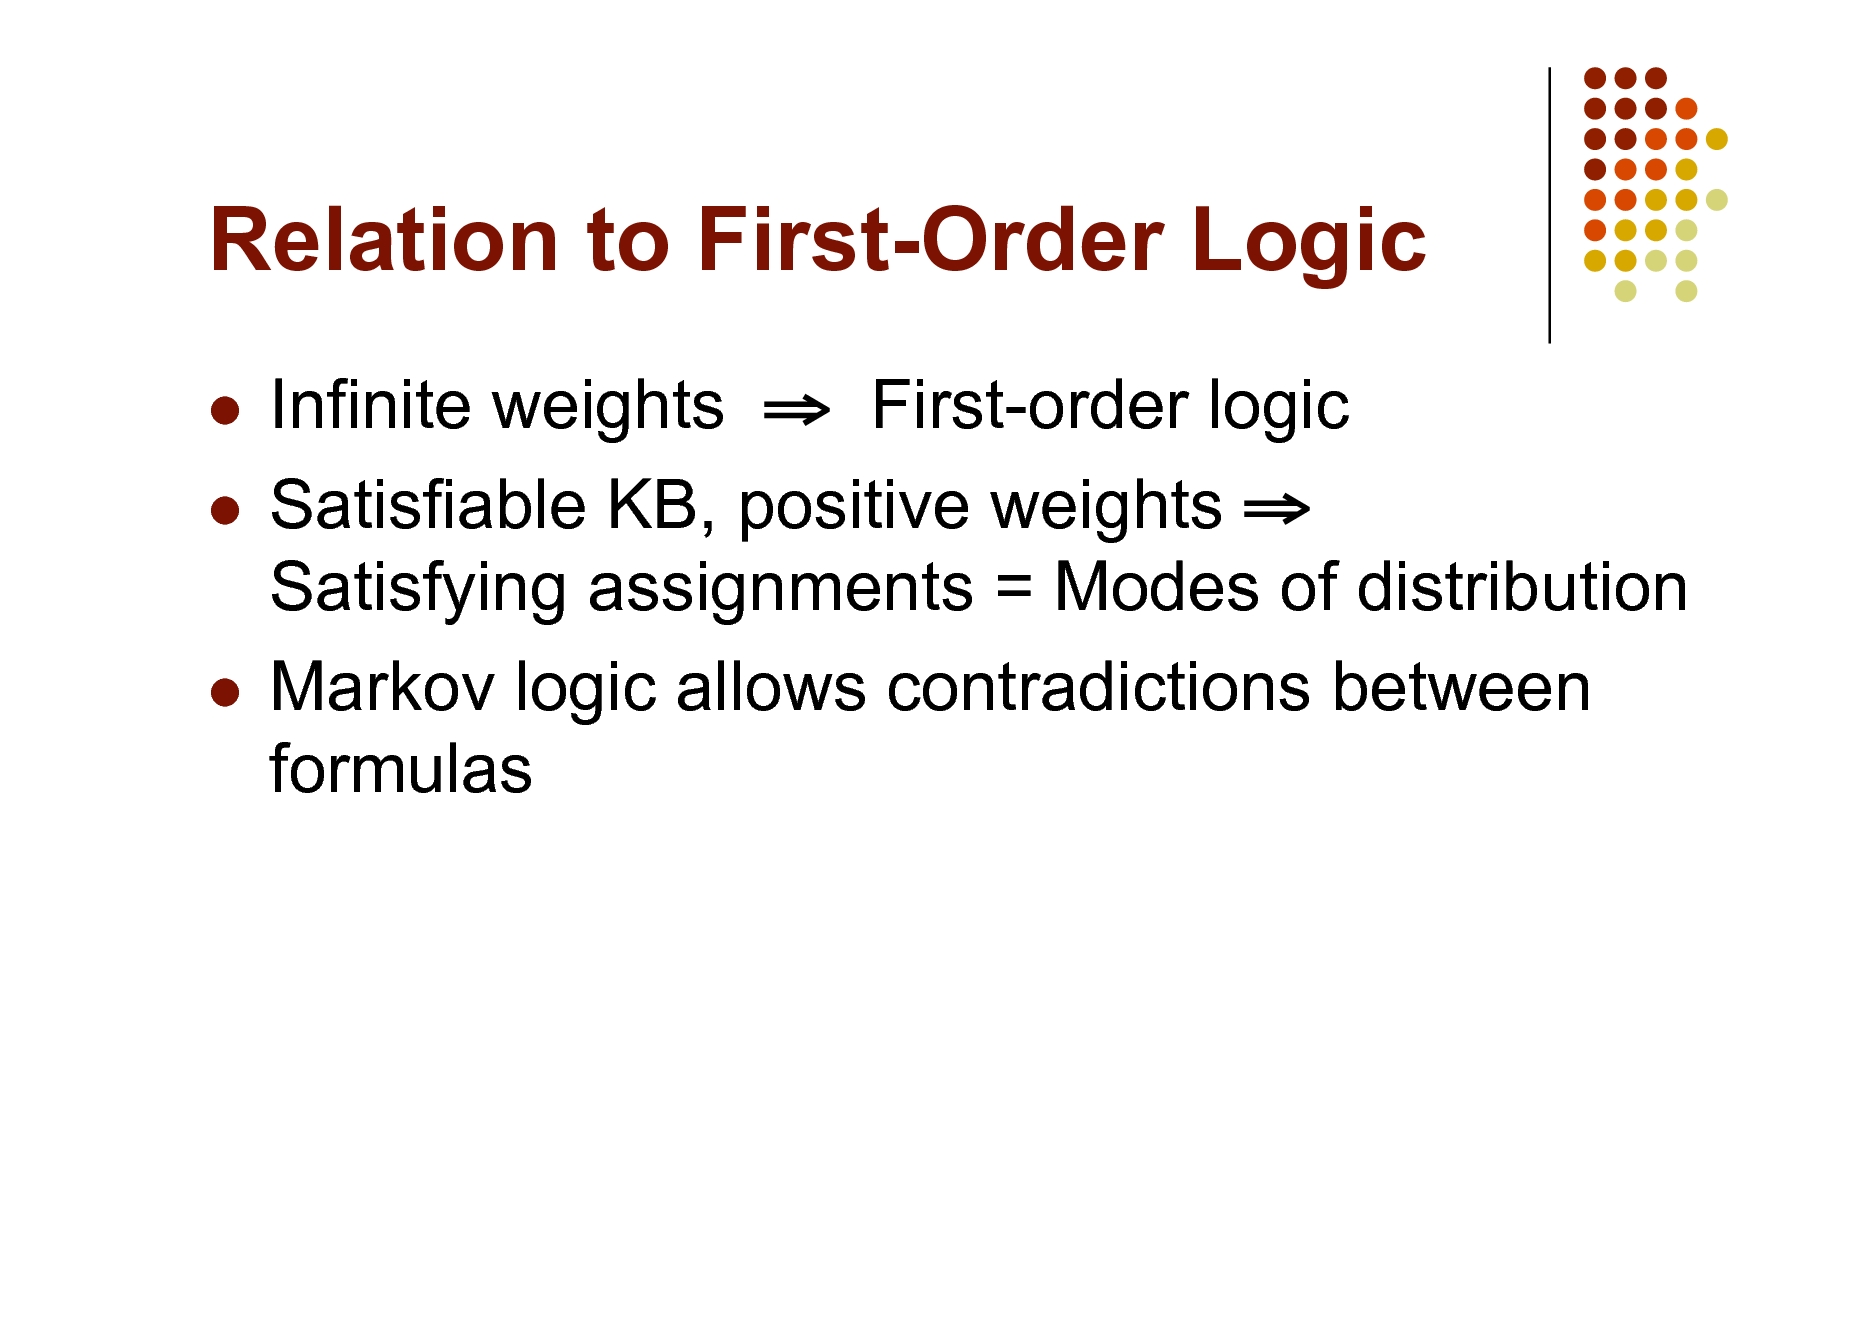 Slide: Relation to First-Order Logic
Infinite weights  First-order logic  Satisfiable KB, positive weights  Satisfying assignments = Modes of distribution  Markov logic allows contradictions between formulas


